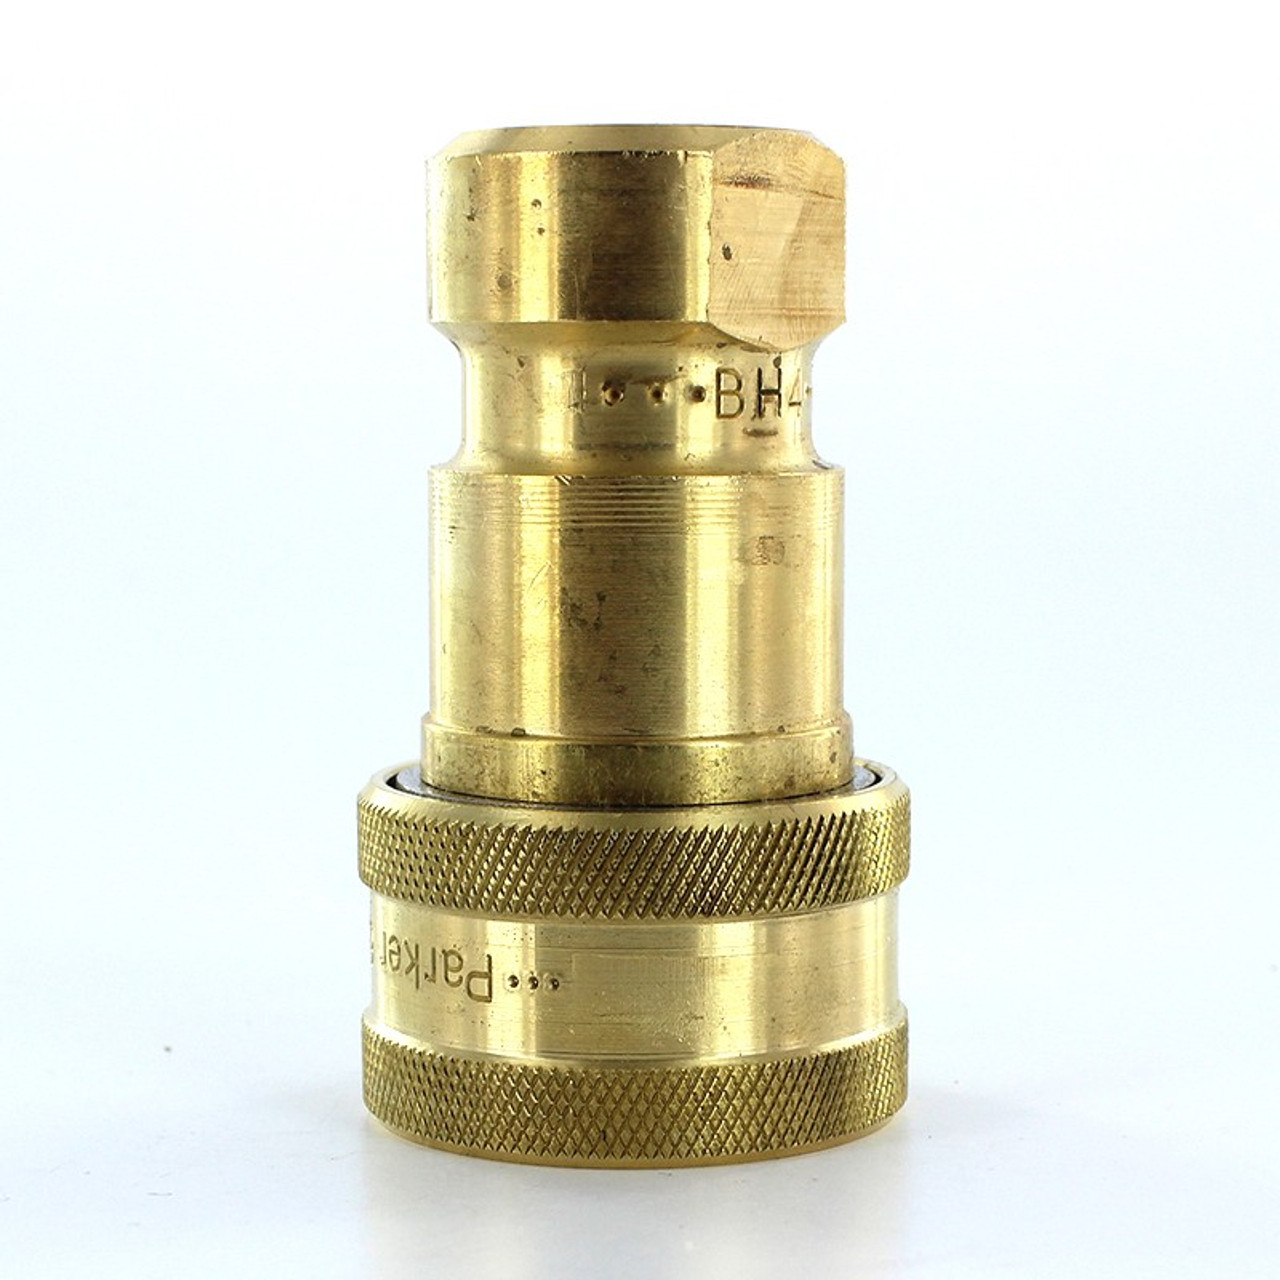 Parker Bh4-60 60 Series Coupler Brass 1/2" Body Size 1/2" Npt Female Port Poppet-Type Valve General Purpose 27.4" Hg Vacuum-1000Psi (69Bar) Wp Nitrile Seals Temp Range Degrees F: (-40 To +250) Conforms To Iso 7241 Series B Standards